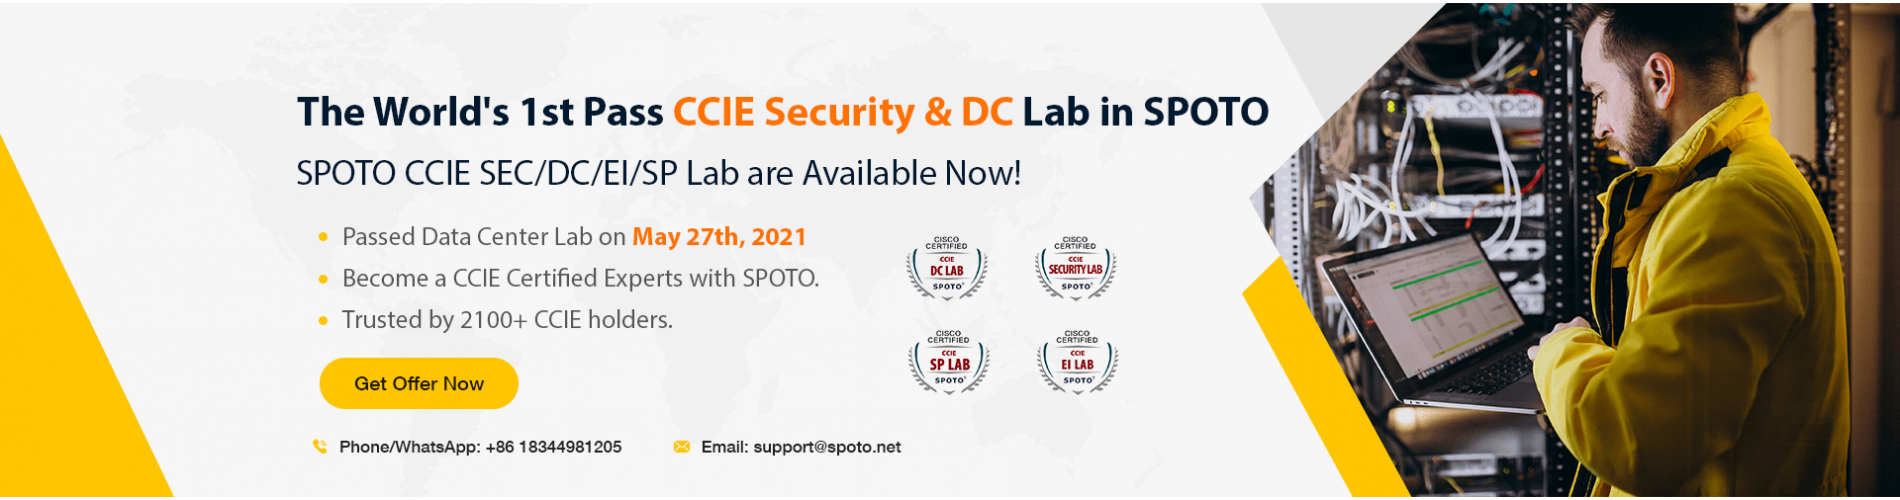 The World's 1st Pass CCIE Security ＆ Lab in SPOTO